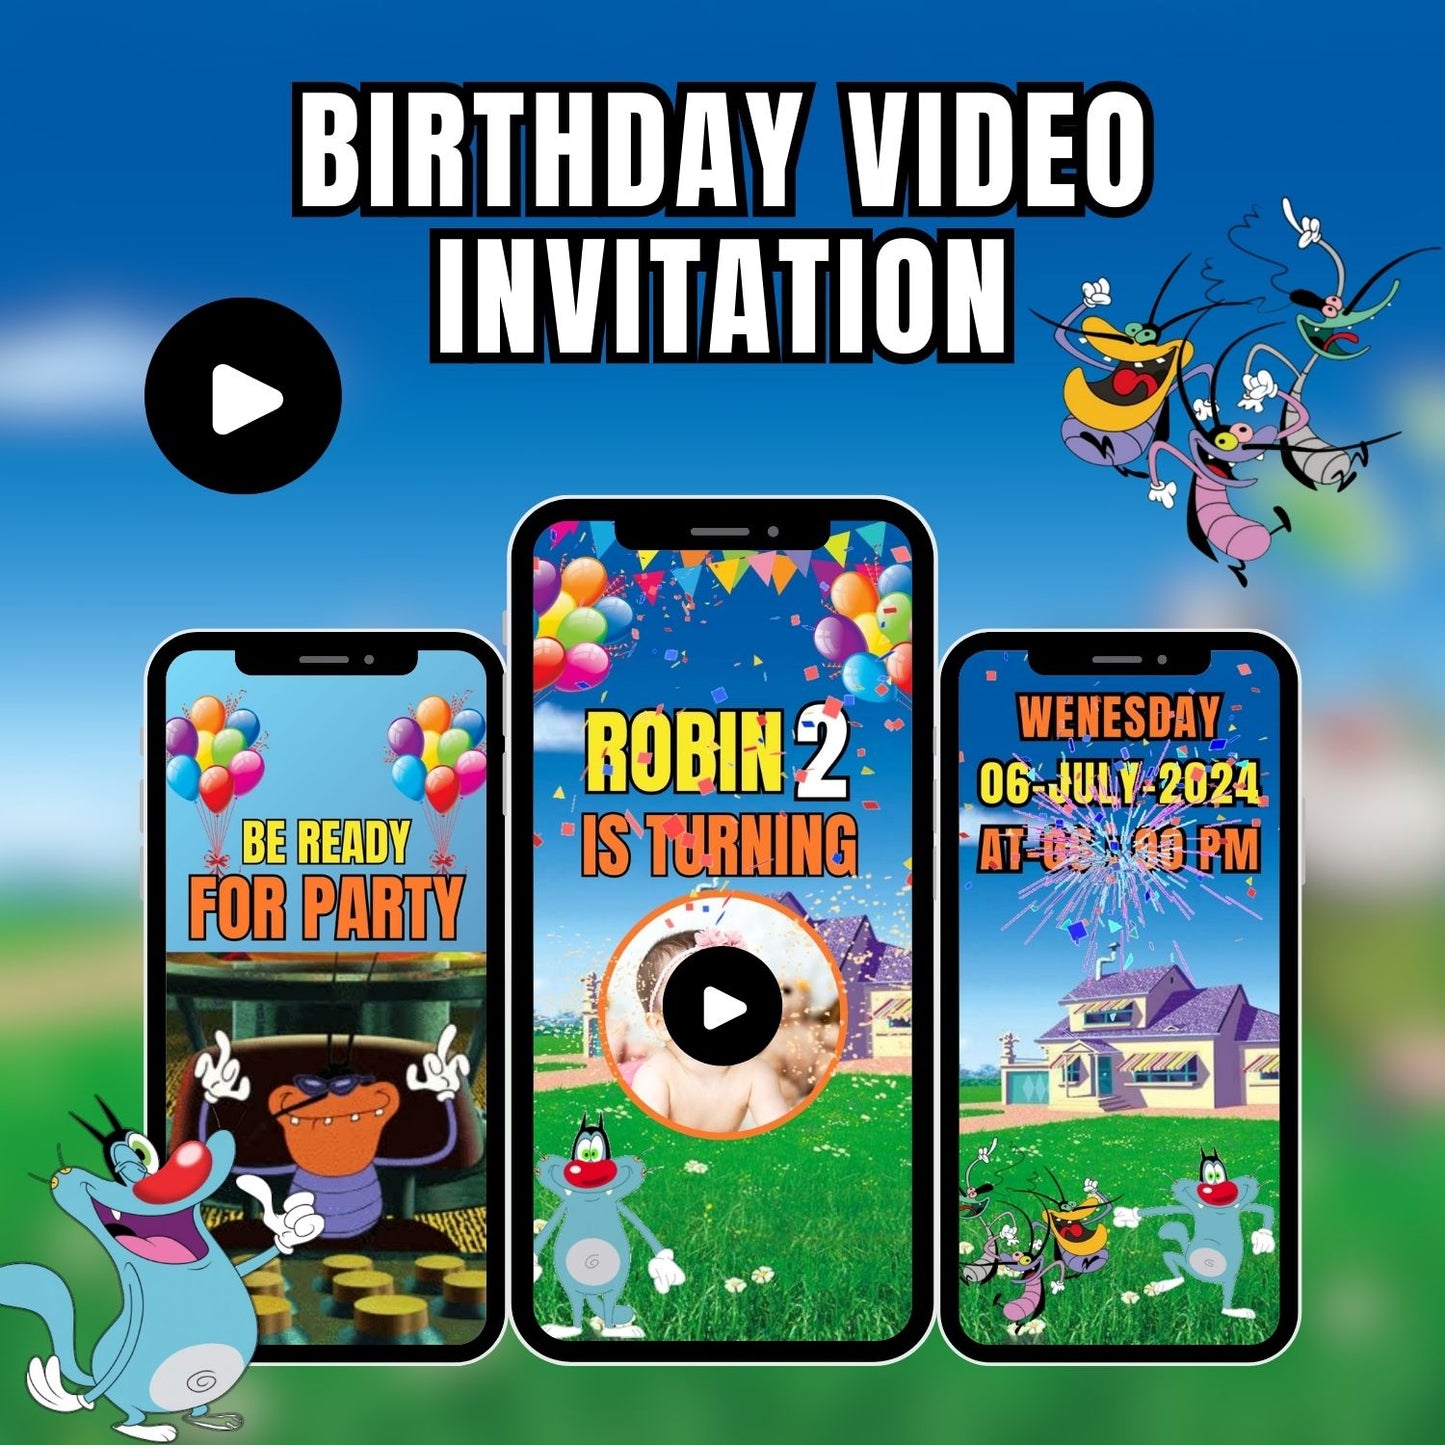 oggy and the cockroaches Birthday Video Invitation | oggy and the cockroaches Animated Theme Invitation